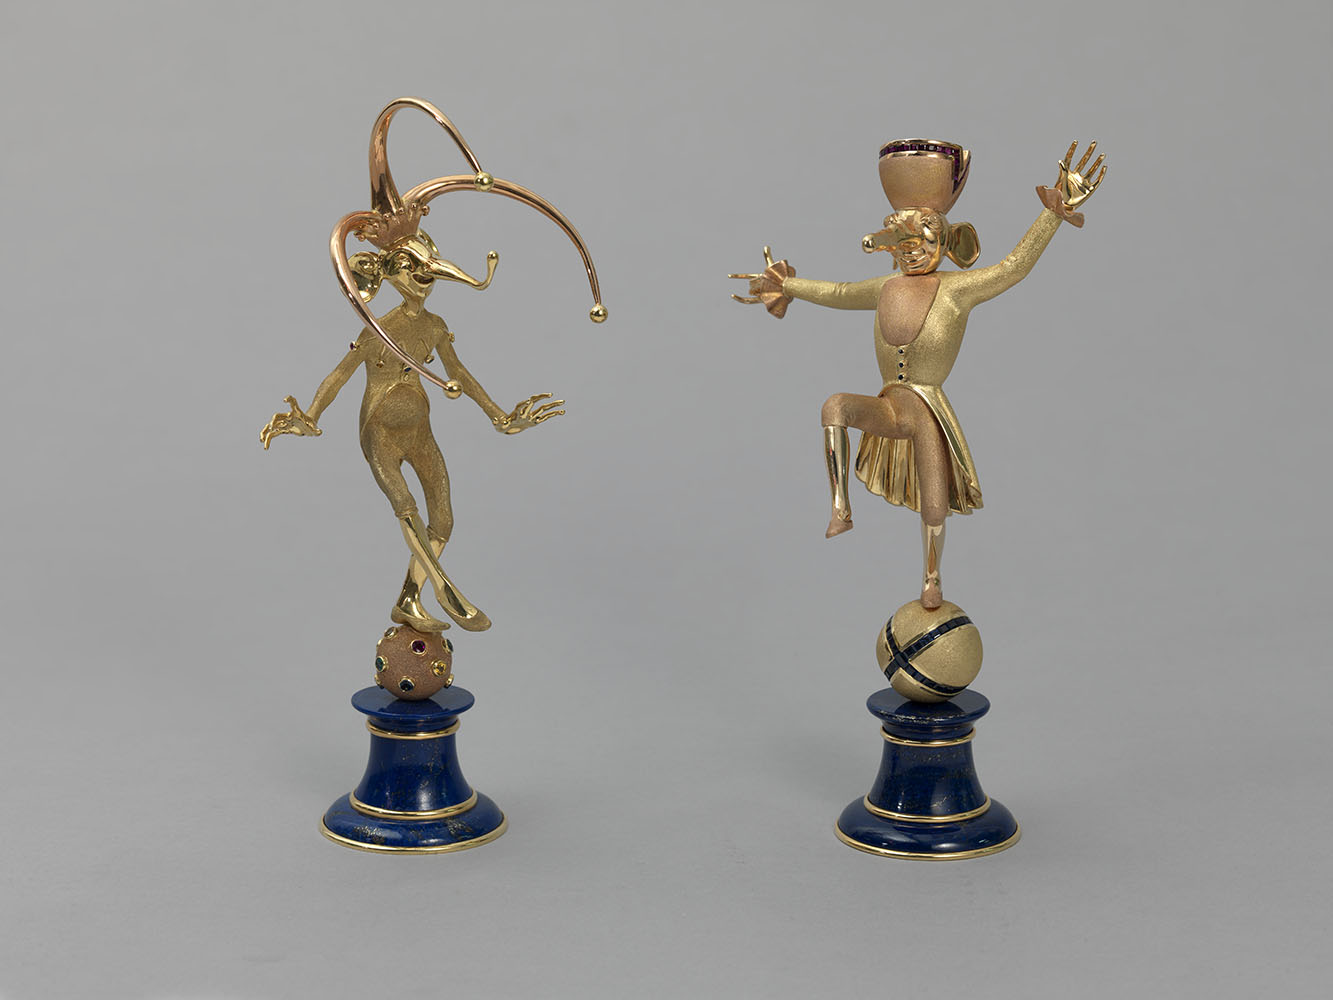 Two Figurines of Jesters from the series </i>&nbsp;Carnival of St. Petersburg